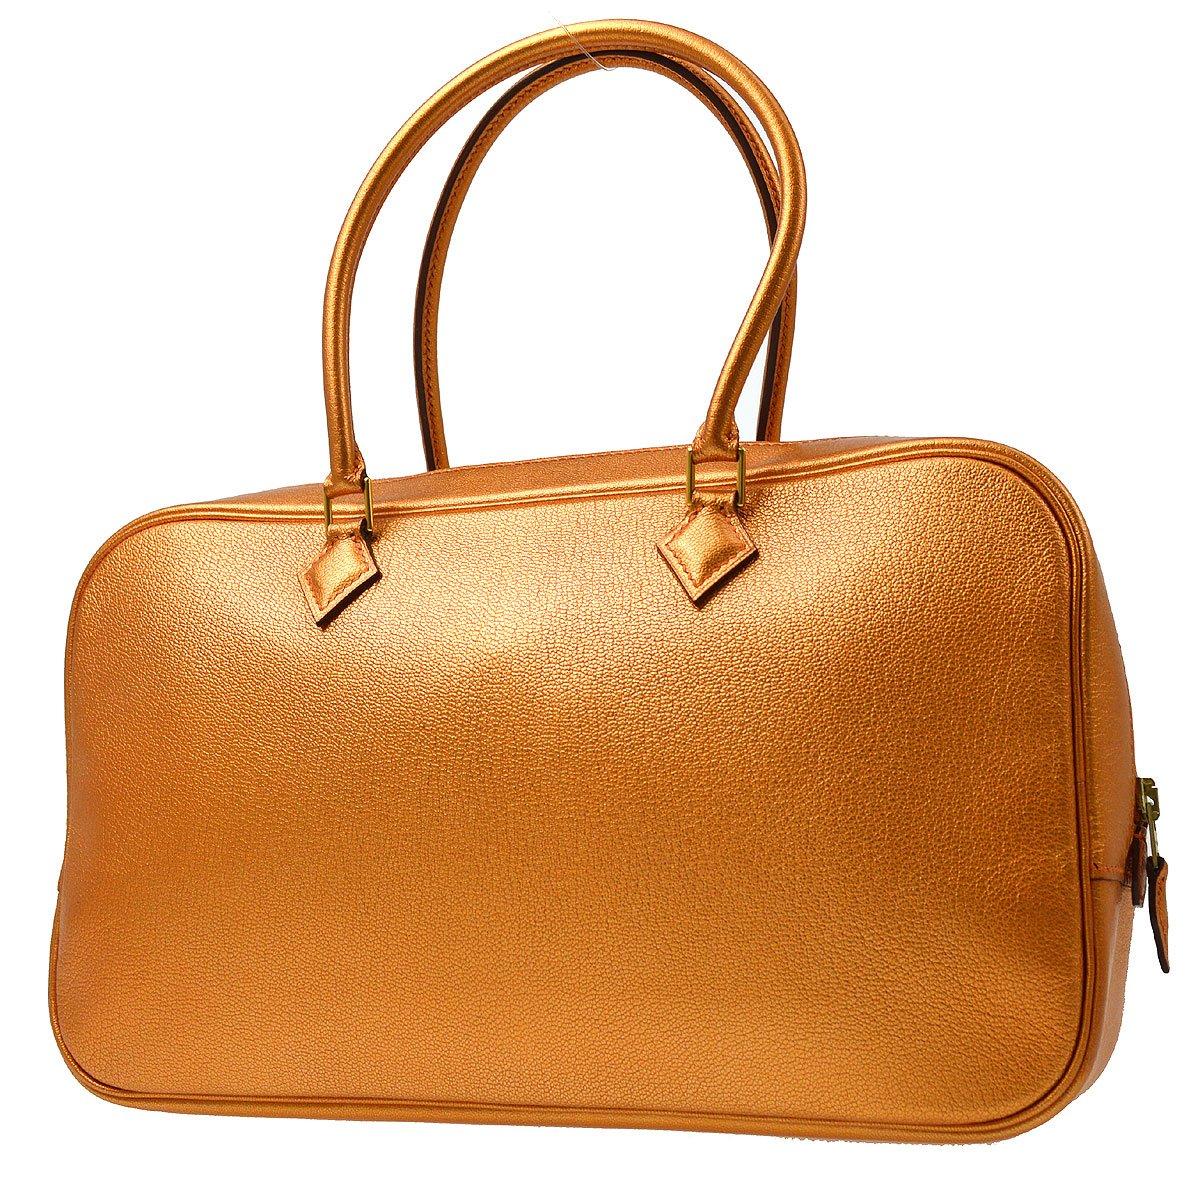 Pre-Owned Vintage Condition
From 2006 Collection
Chevre Coromandel Leather
Gold Hardware 
Measures 11